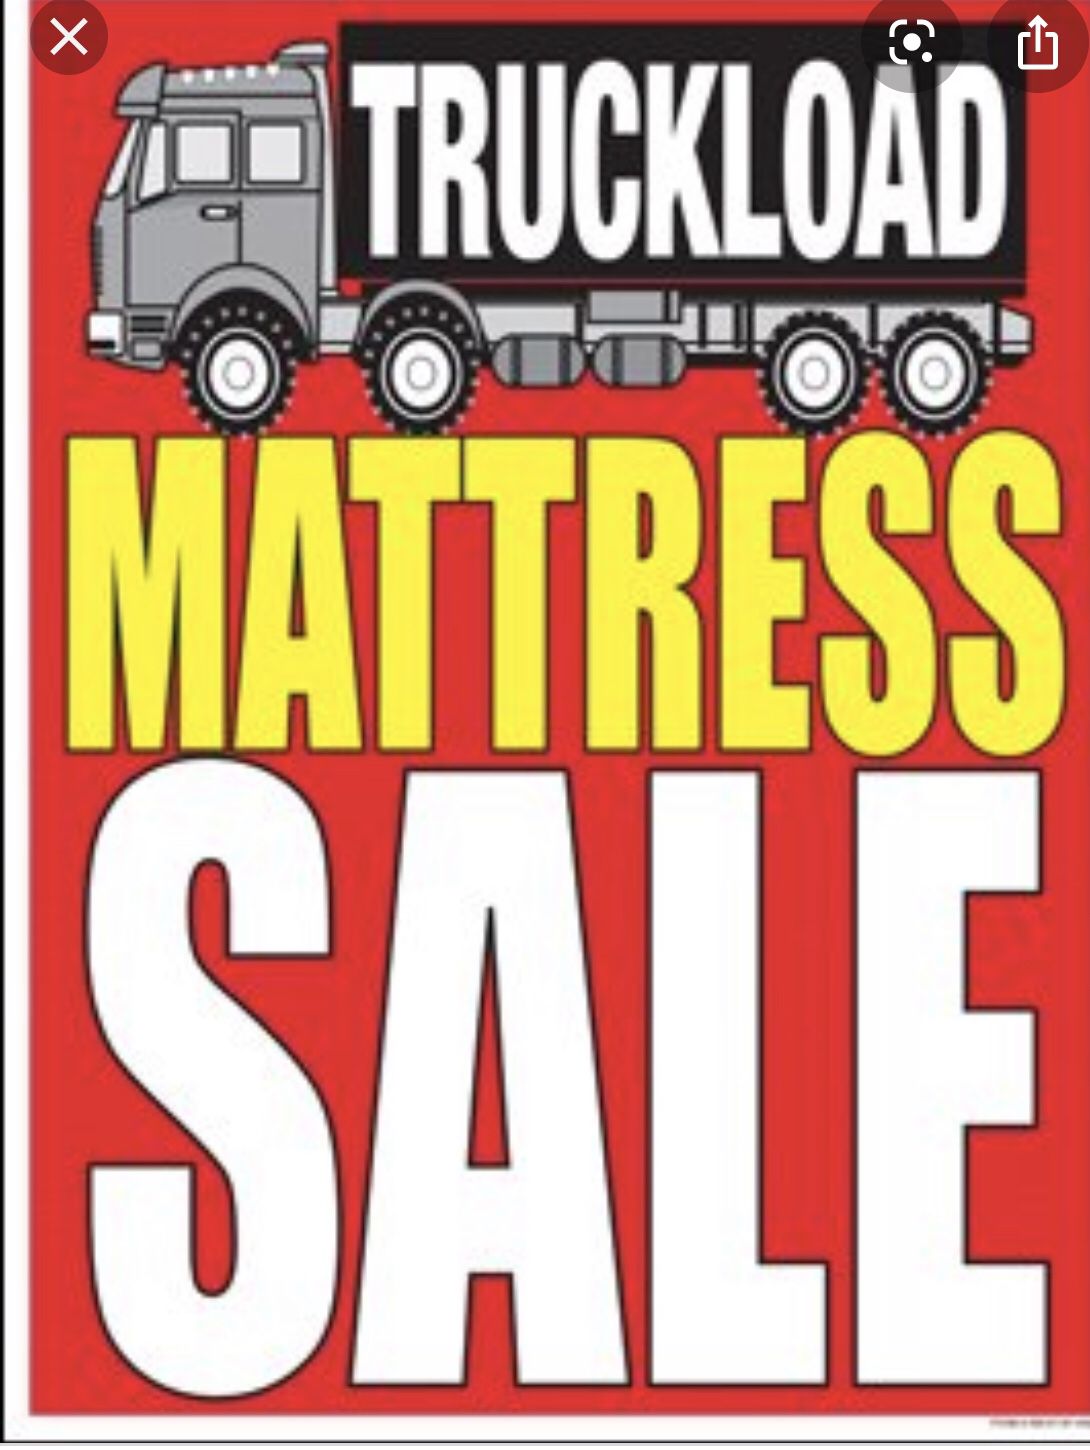 Big sale mattress twin size $169.95. Queen size $250.95 king size $350.95. Full size $199.95.